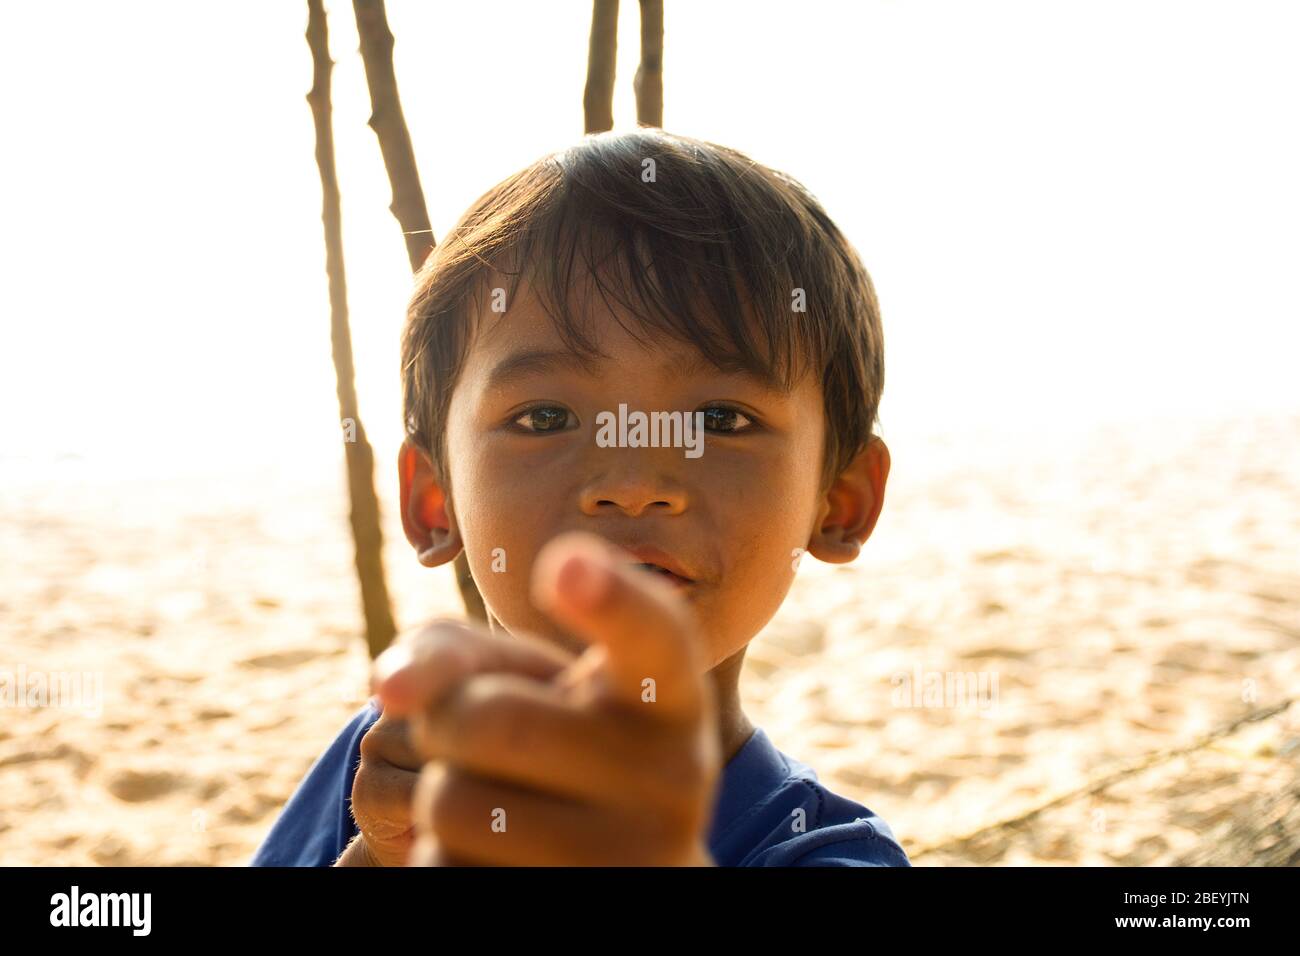 A young local boy from Cambodia, playfully looking and pointing at the camera. Stock Photo